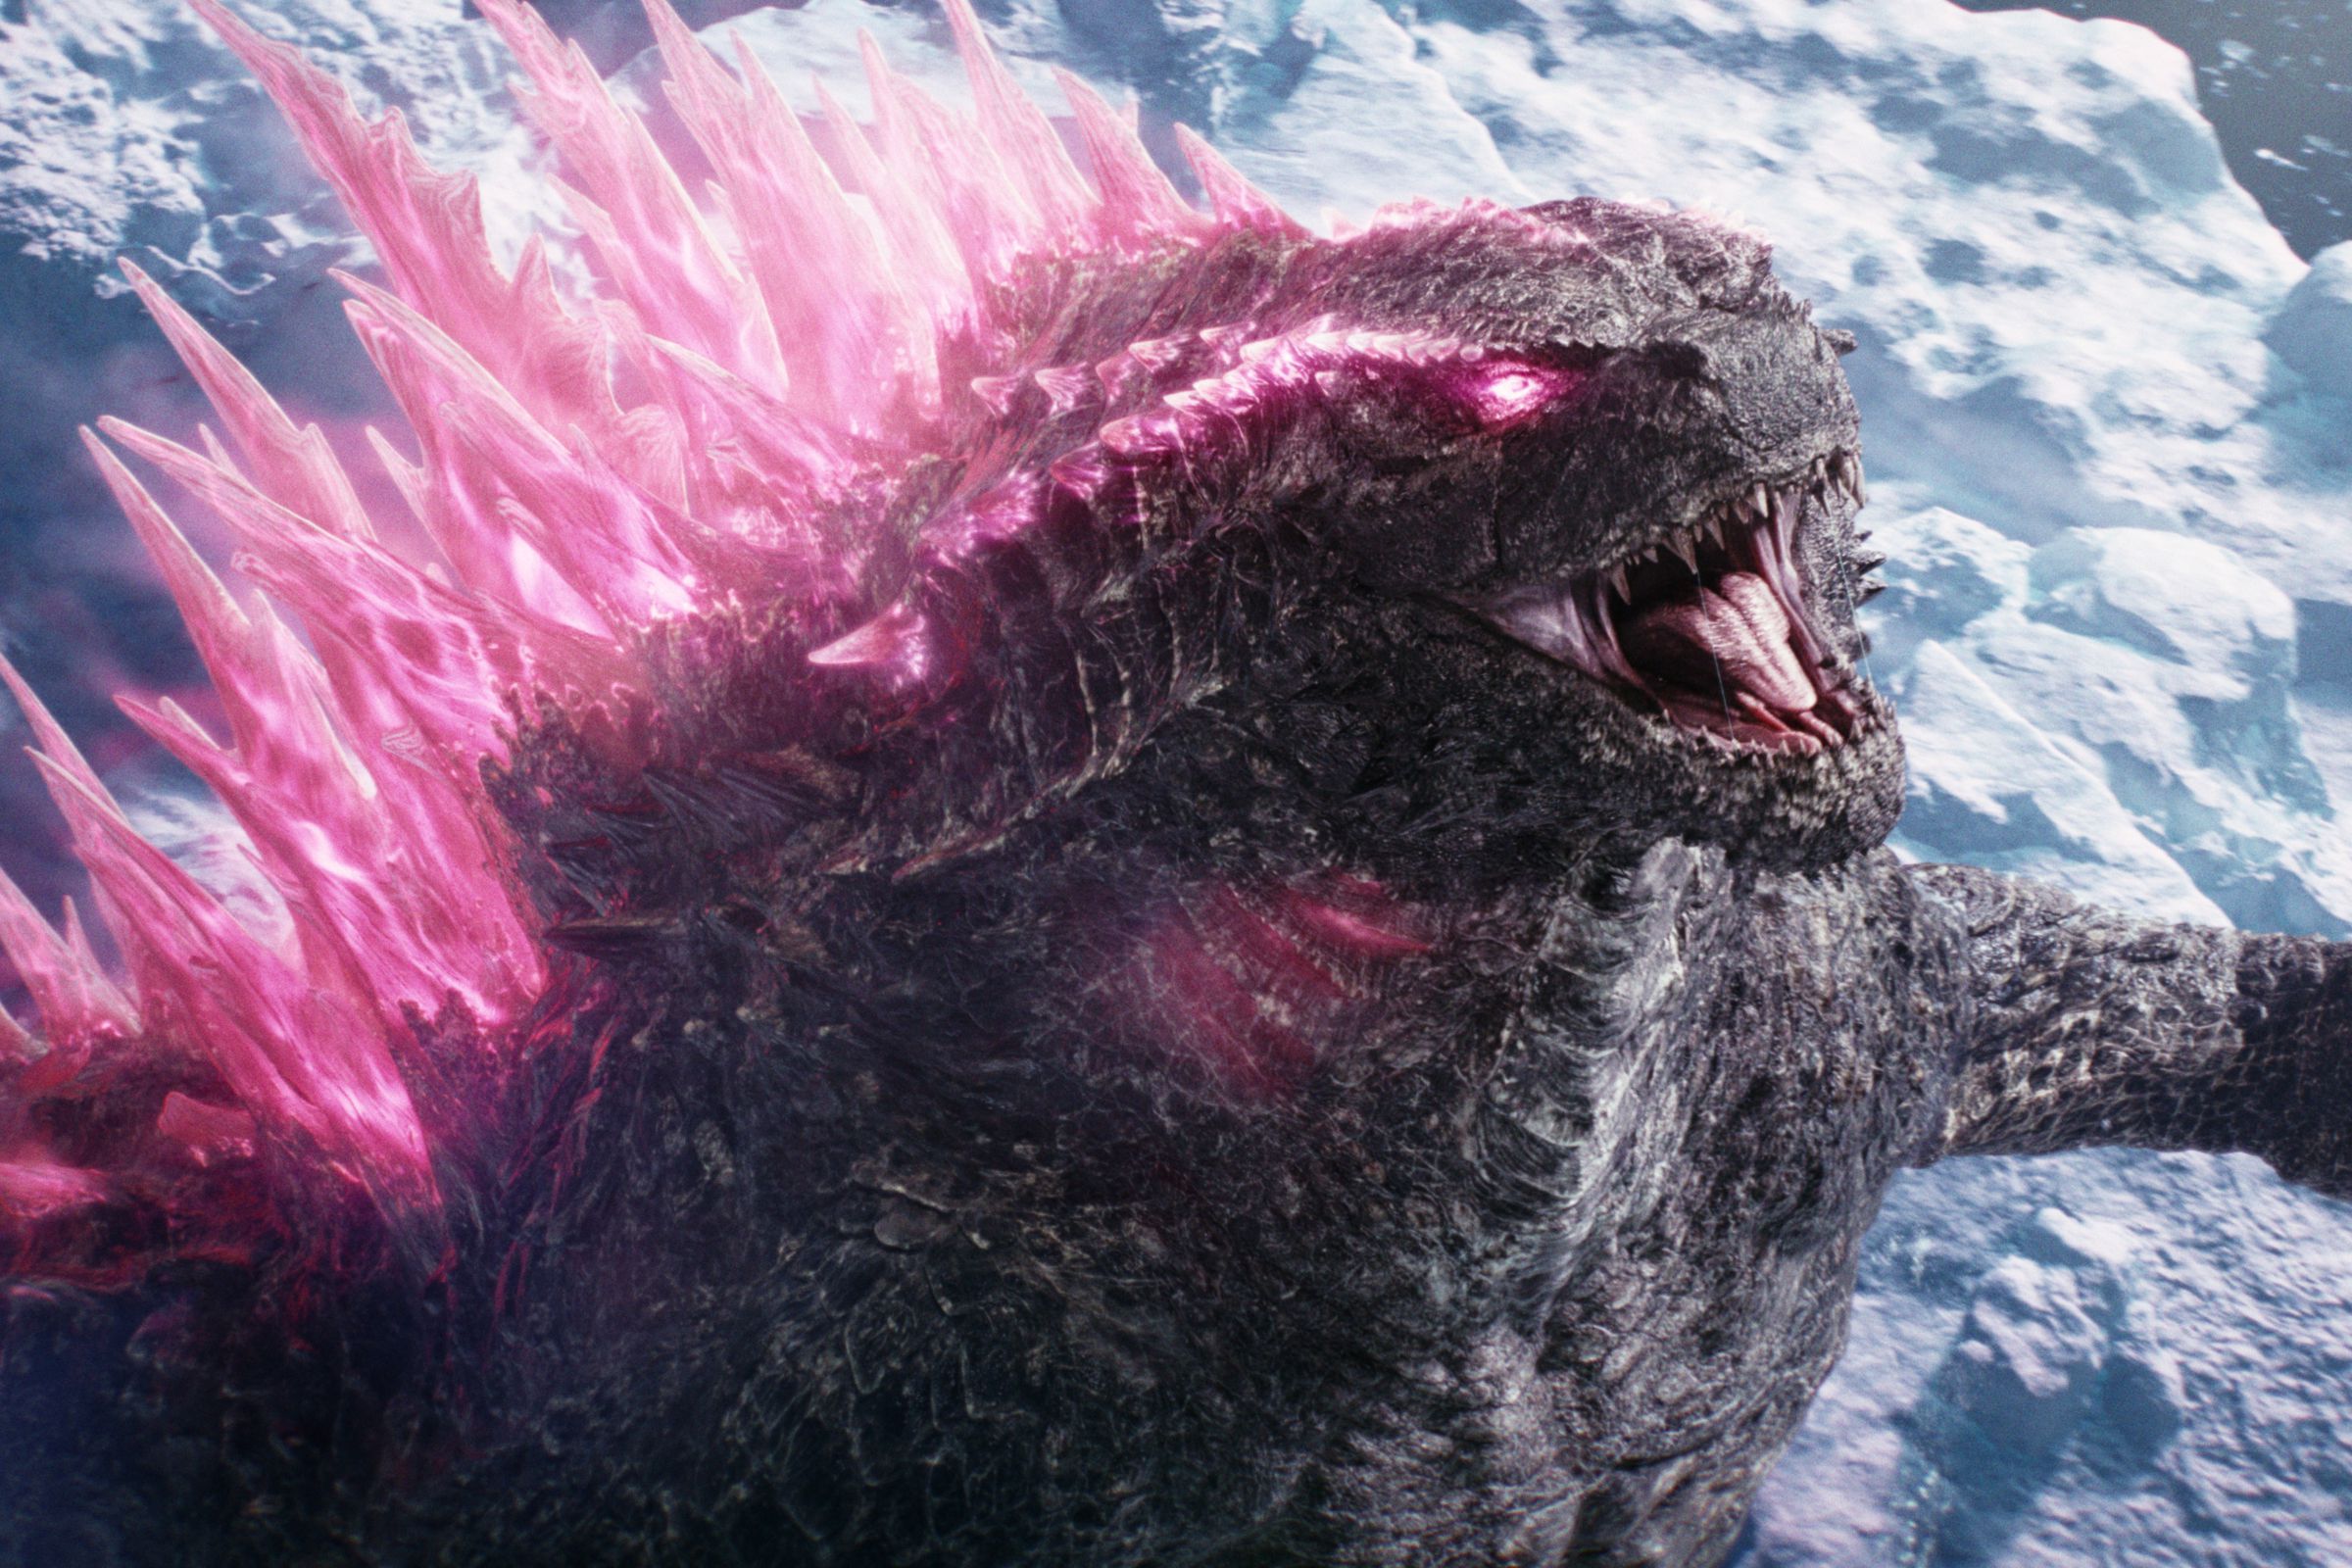 A massive, bipedal reptile with glowing pink spikes protruding from its back roaring up at the sky.